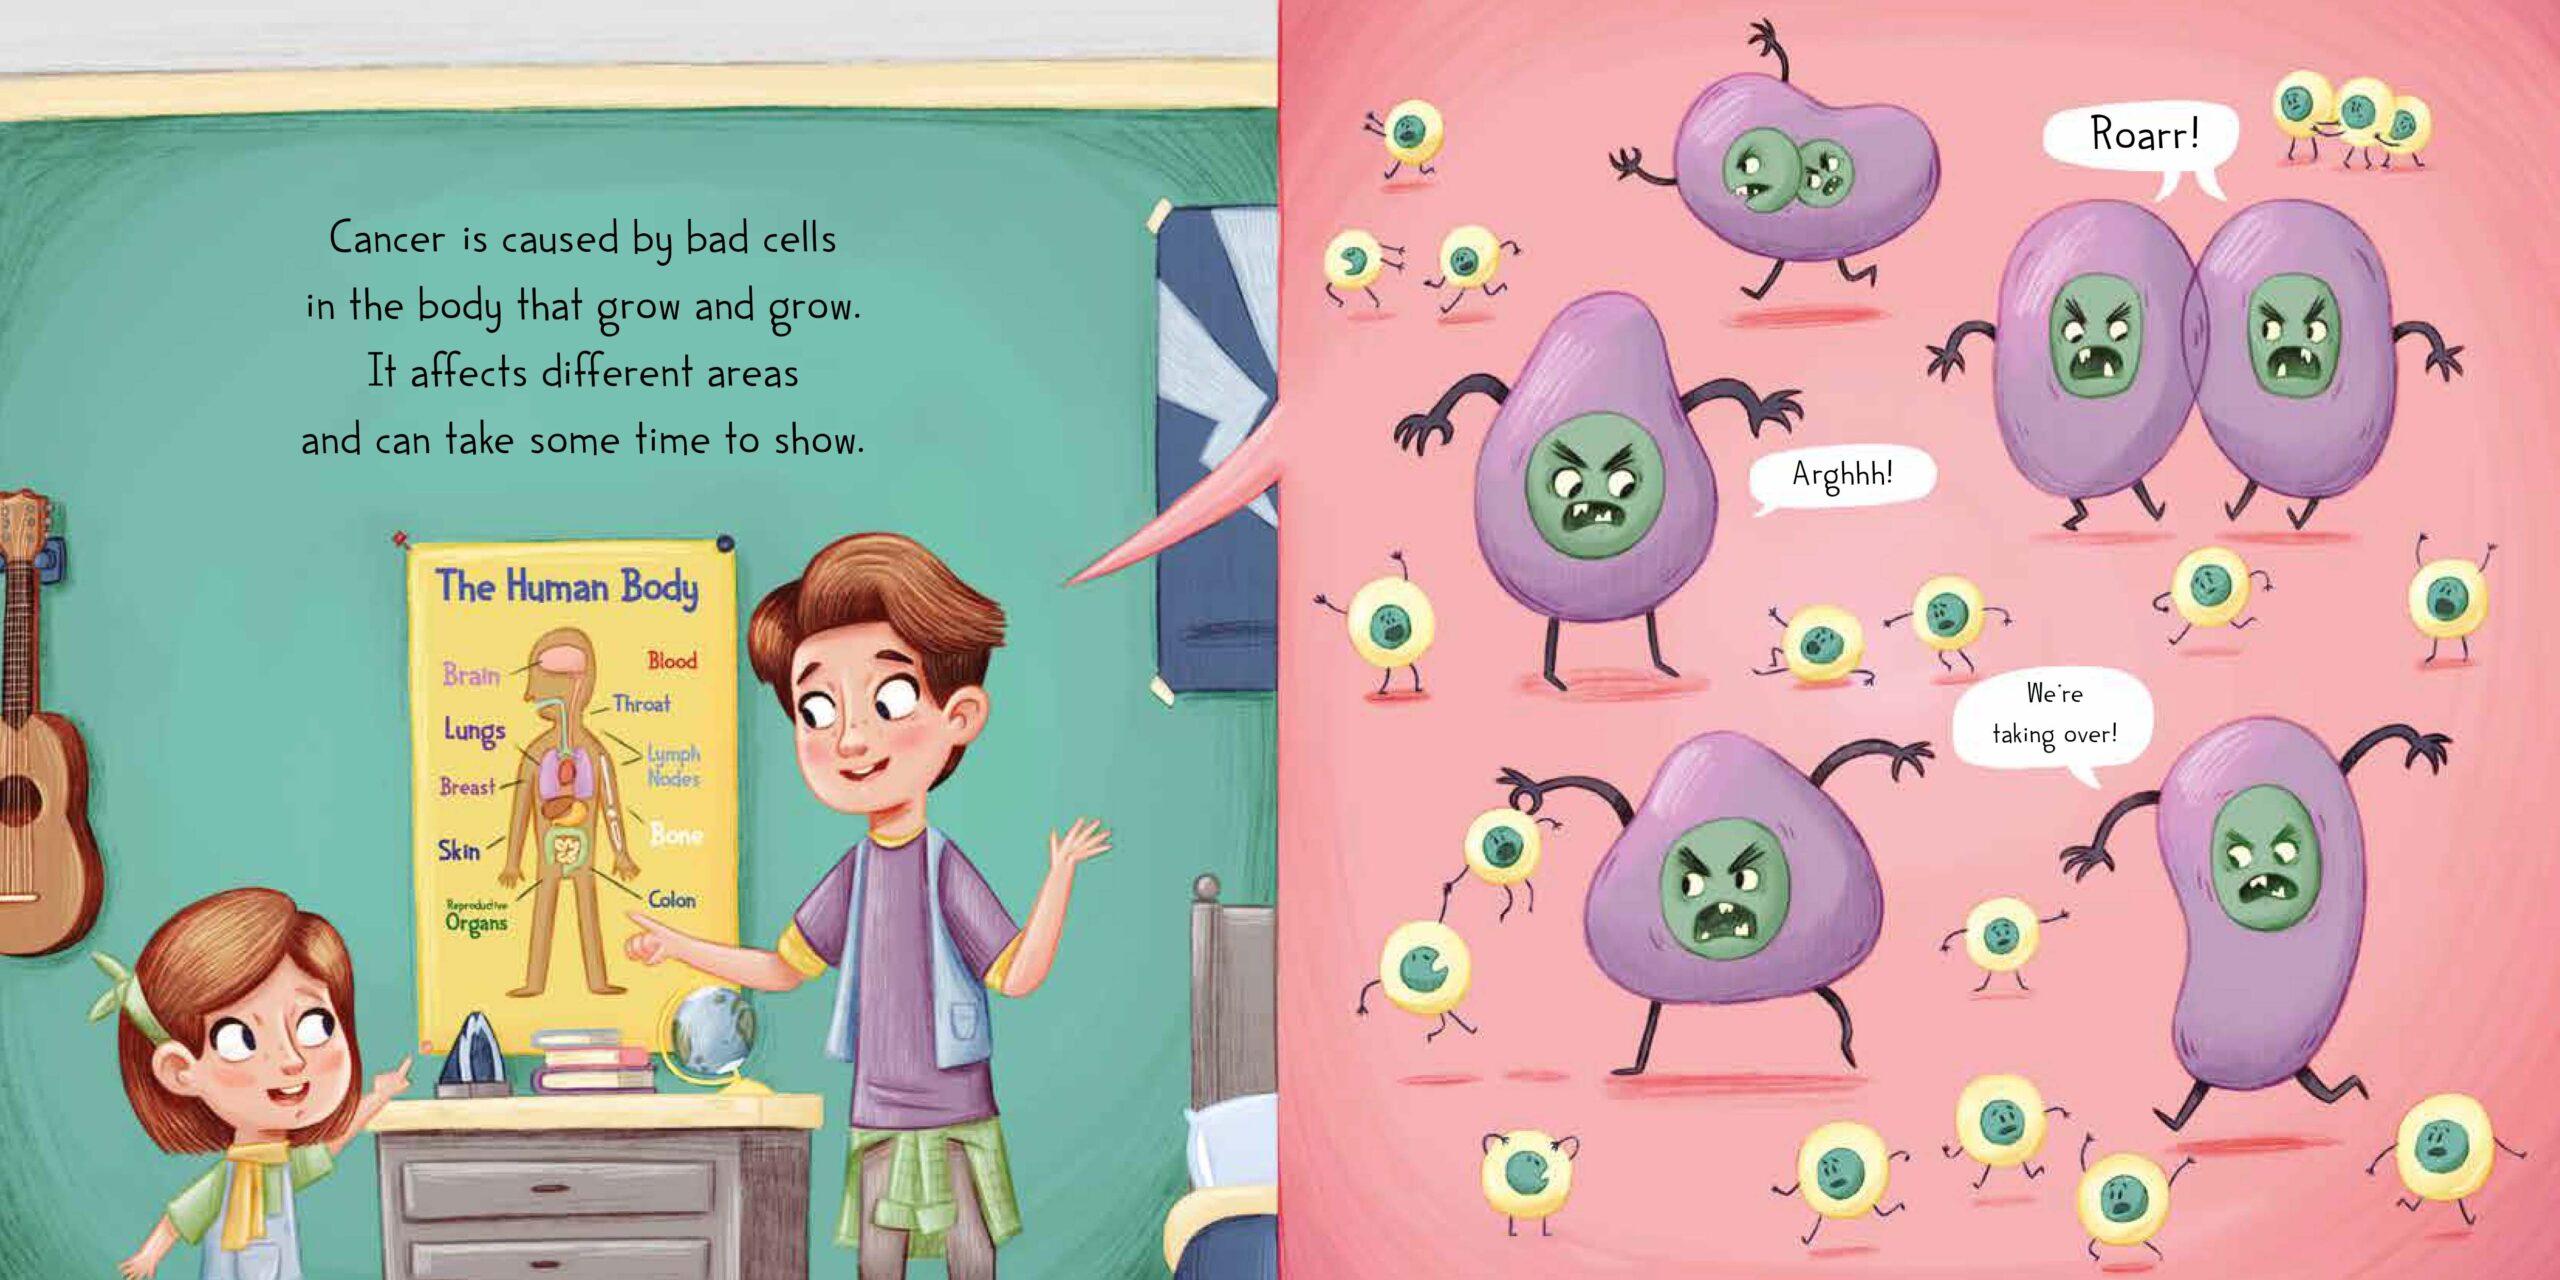 Illustration taken from 'My Brother Has Cancer', a children's book about cancer.